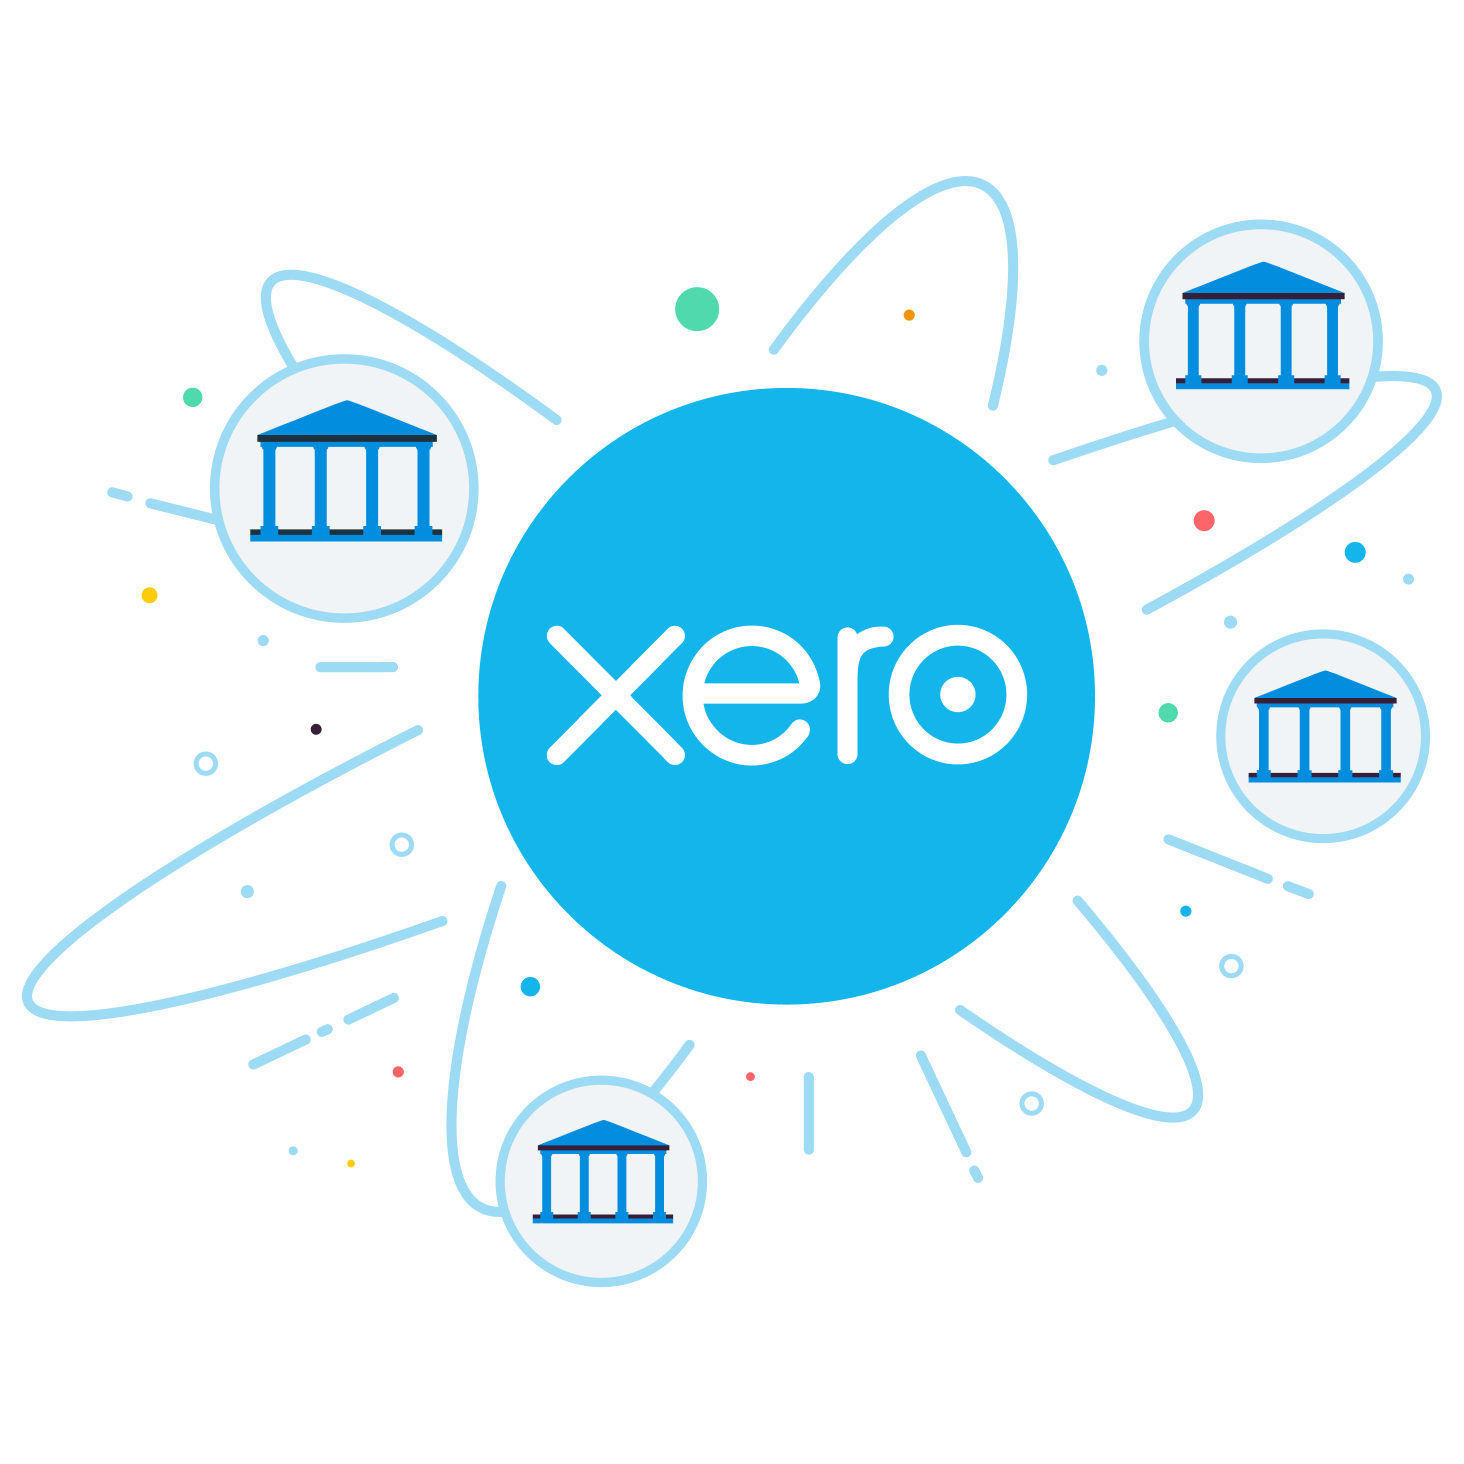 Many banks connect directly to Xero.